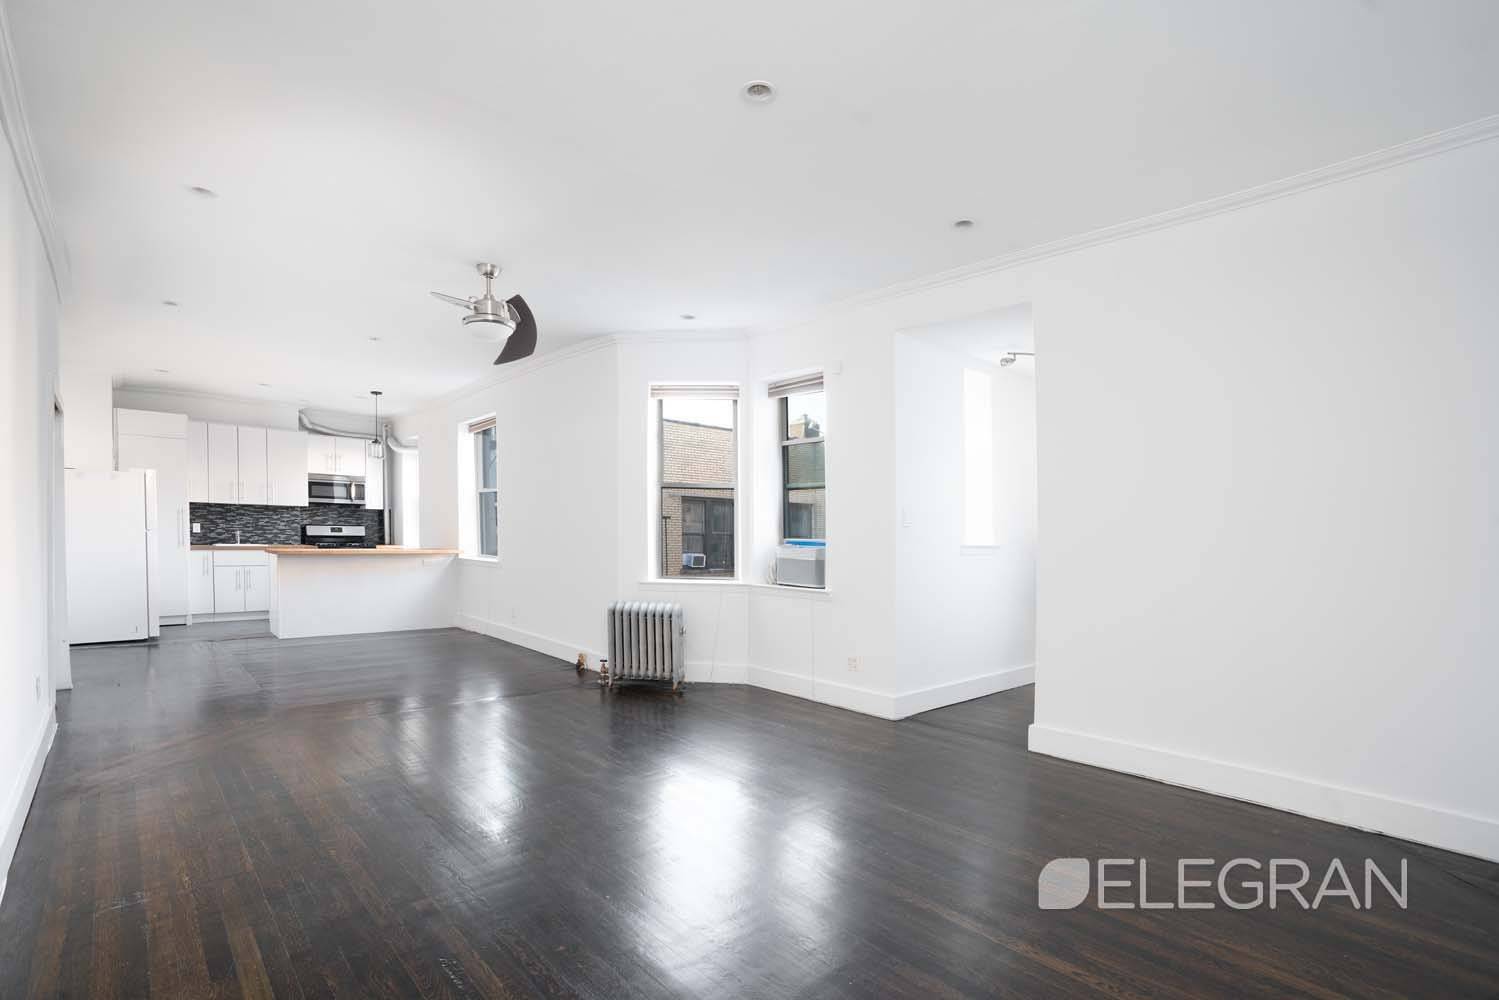 This 780sqft apartment is perched on the top floor of an elevator building and will impress from the moment you step through the front door.